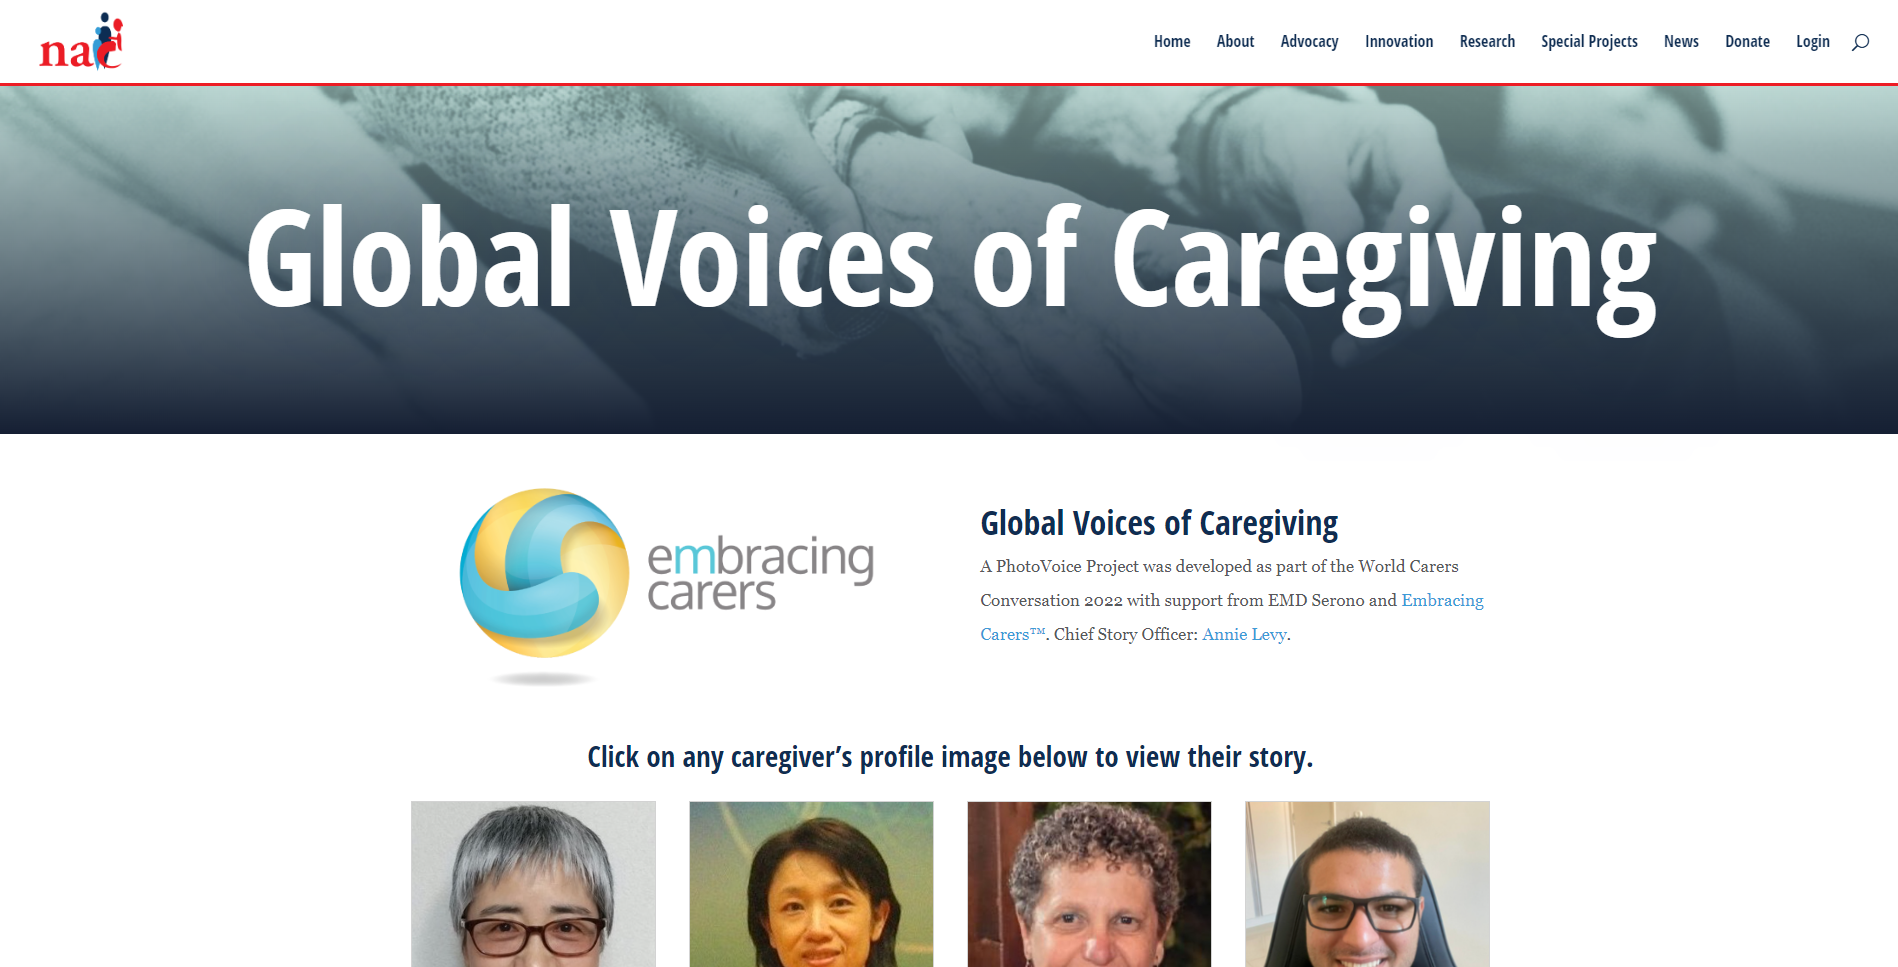 Global Voices of Caregiving